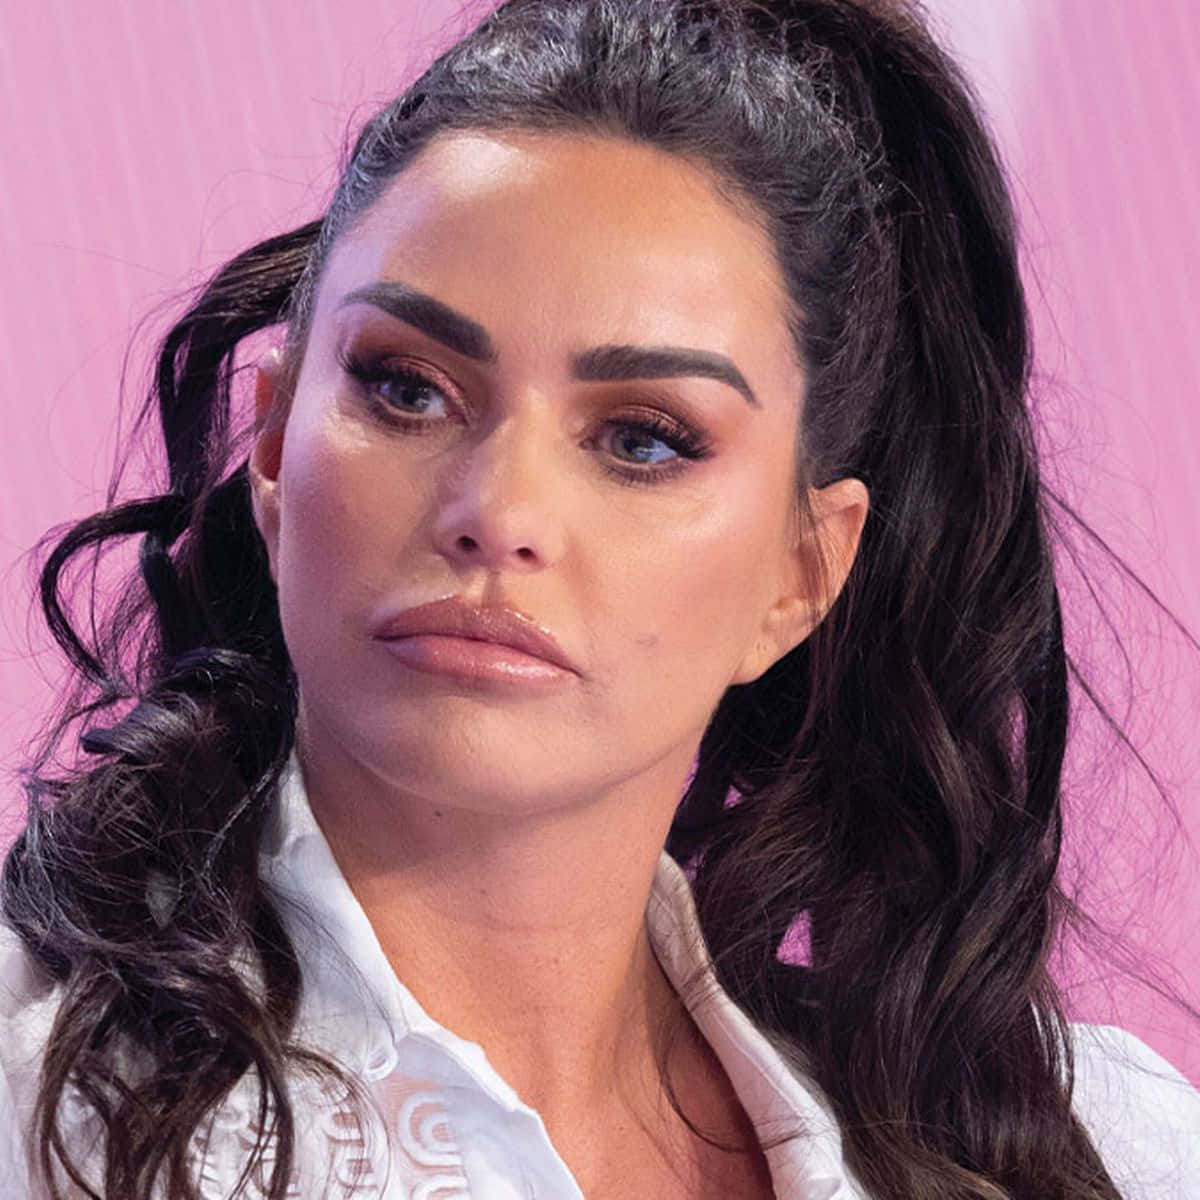 A Radiant Katie Price Posing Confidently Wallpaper